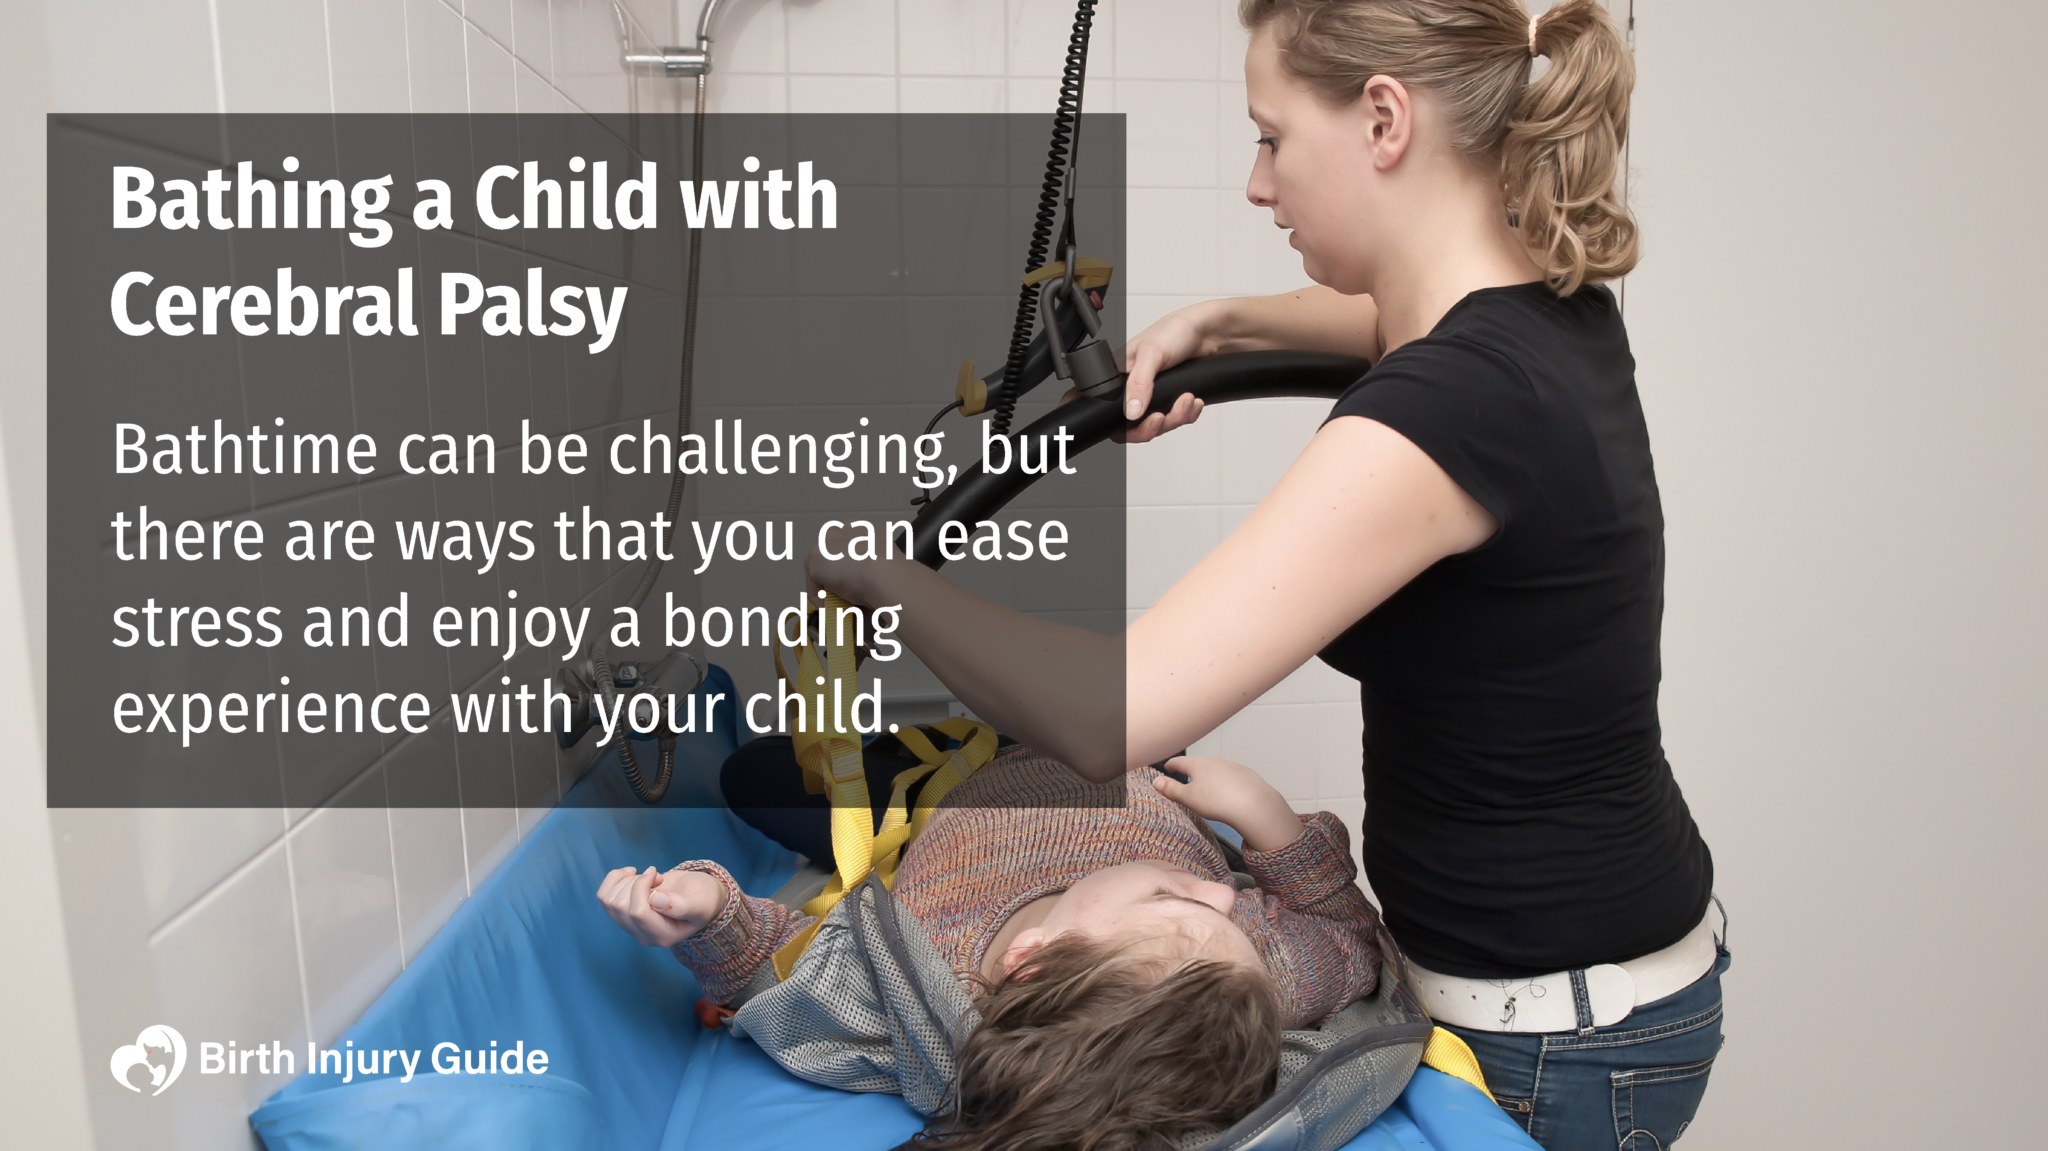 Bathing a Child with Cerebral Palsy